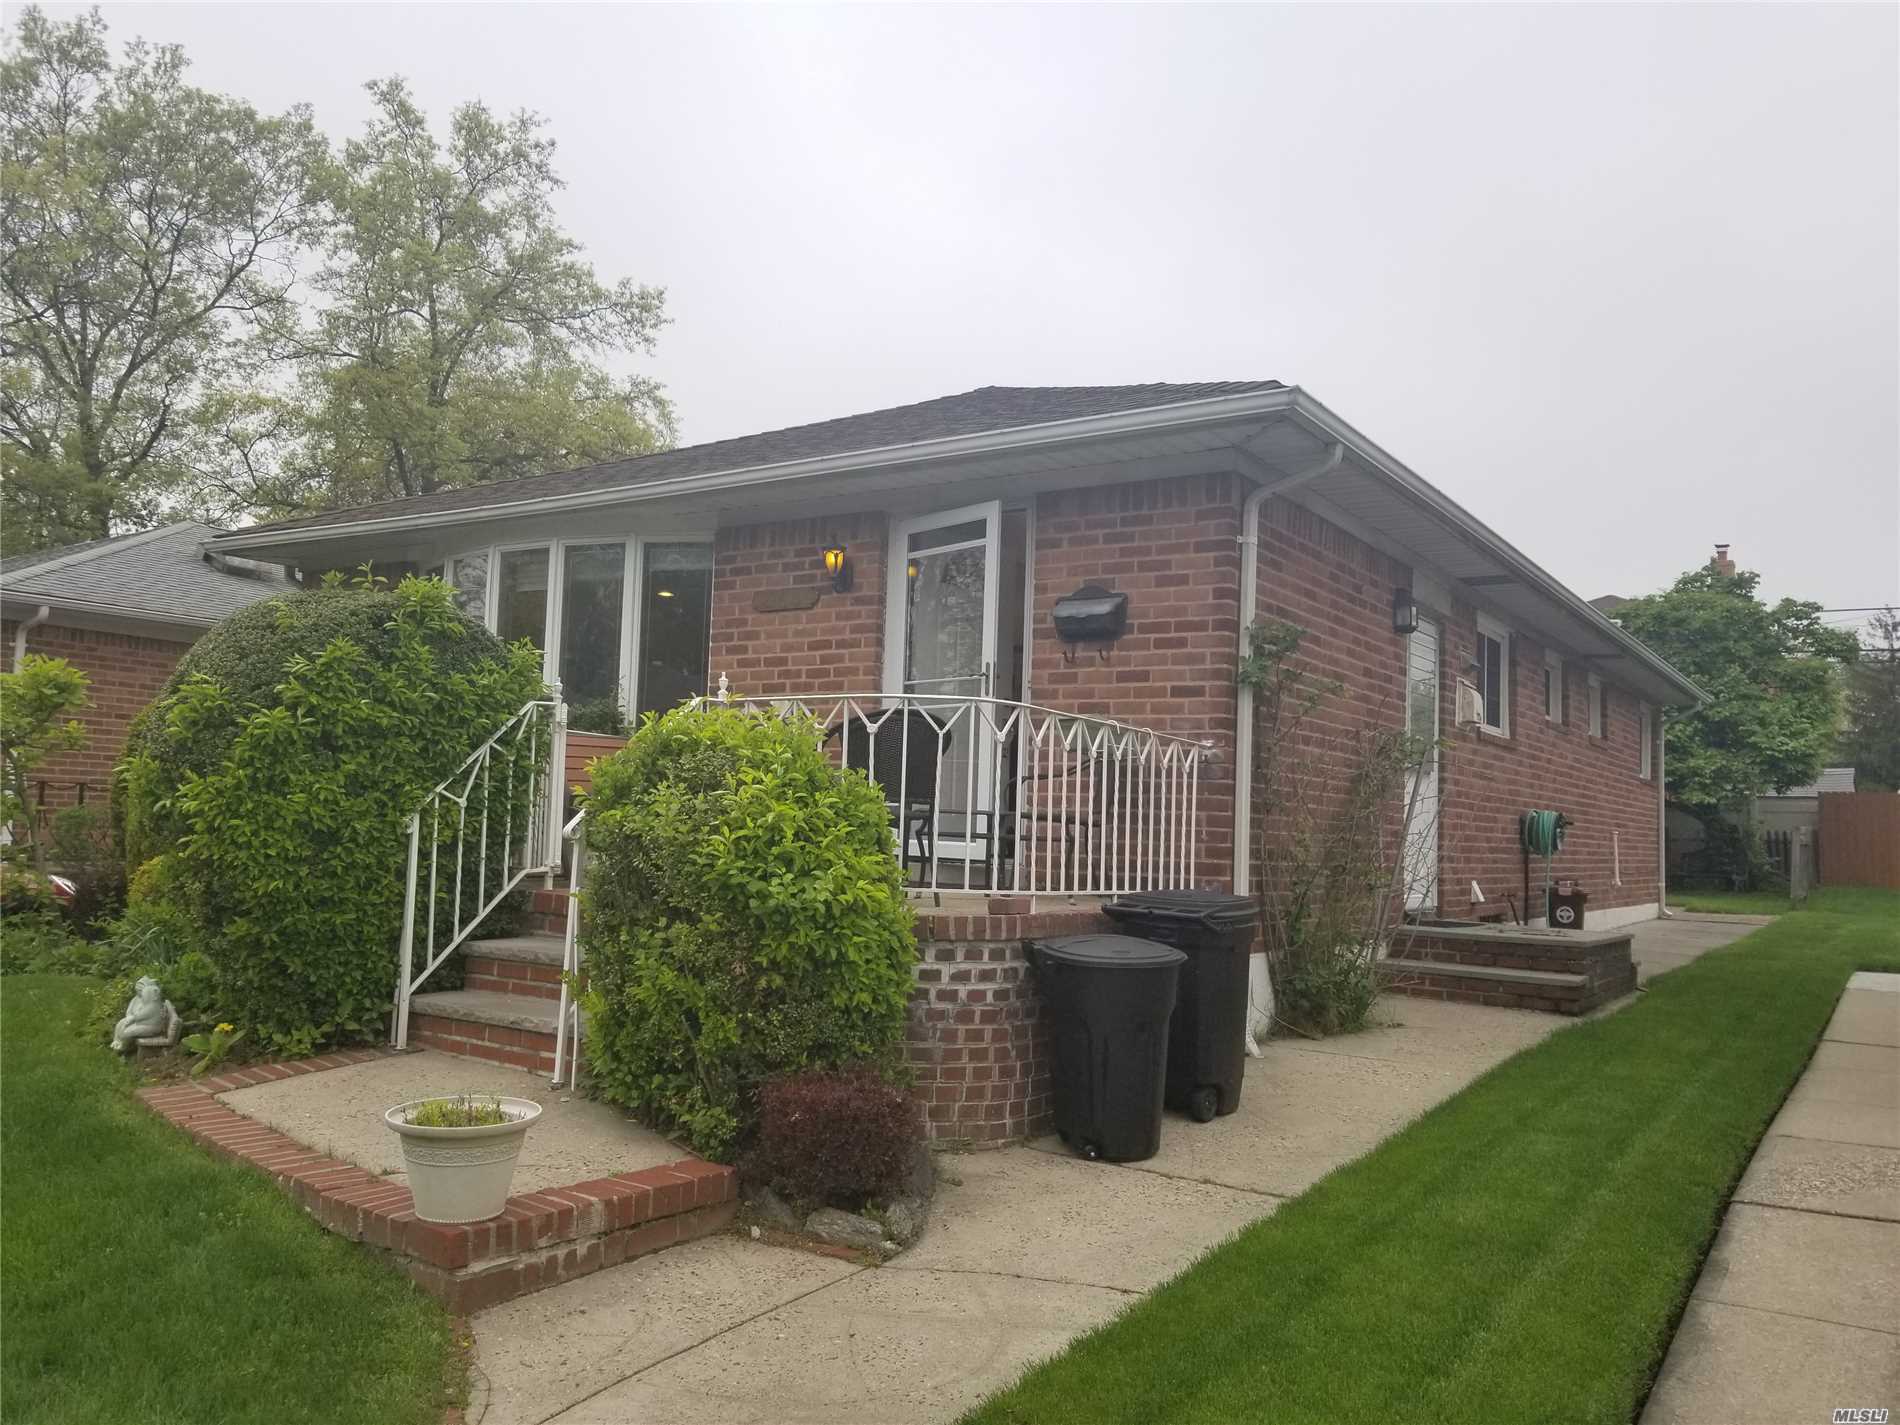 Very charming whole brick ranch, south faced bright living room with bay window, hardwood floor thru-out, professional landscaping, quiet & convenient location, bus Q27 to Flushing, QM#5 to NYC, best school dist. #26, P.S.#188, I.S.74, super dry basement, very well maintained house, backyard with brick patio brick, 1 block from Alley Pond Park, ....so great to live near to park, shower bathroom in the basement is a gift, your family will love this home sweet home!....